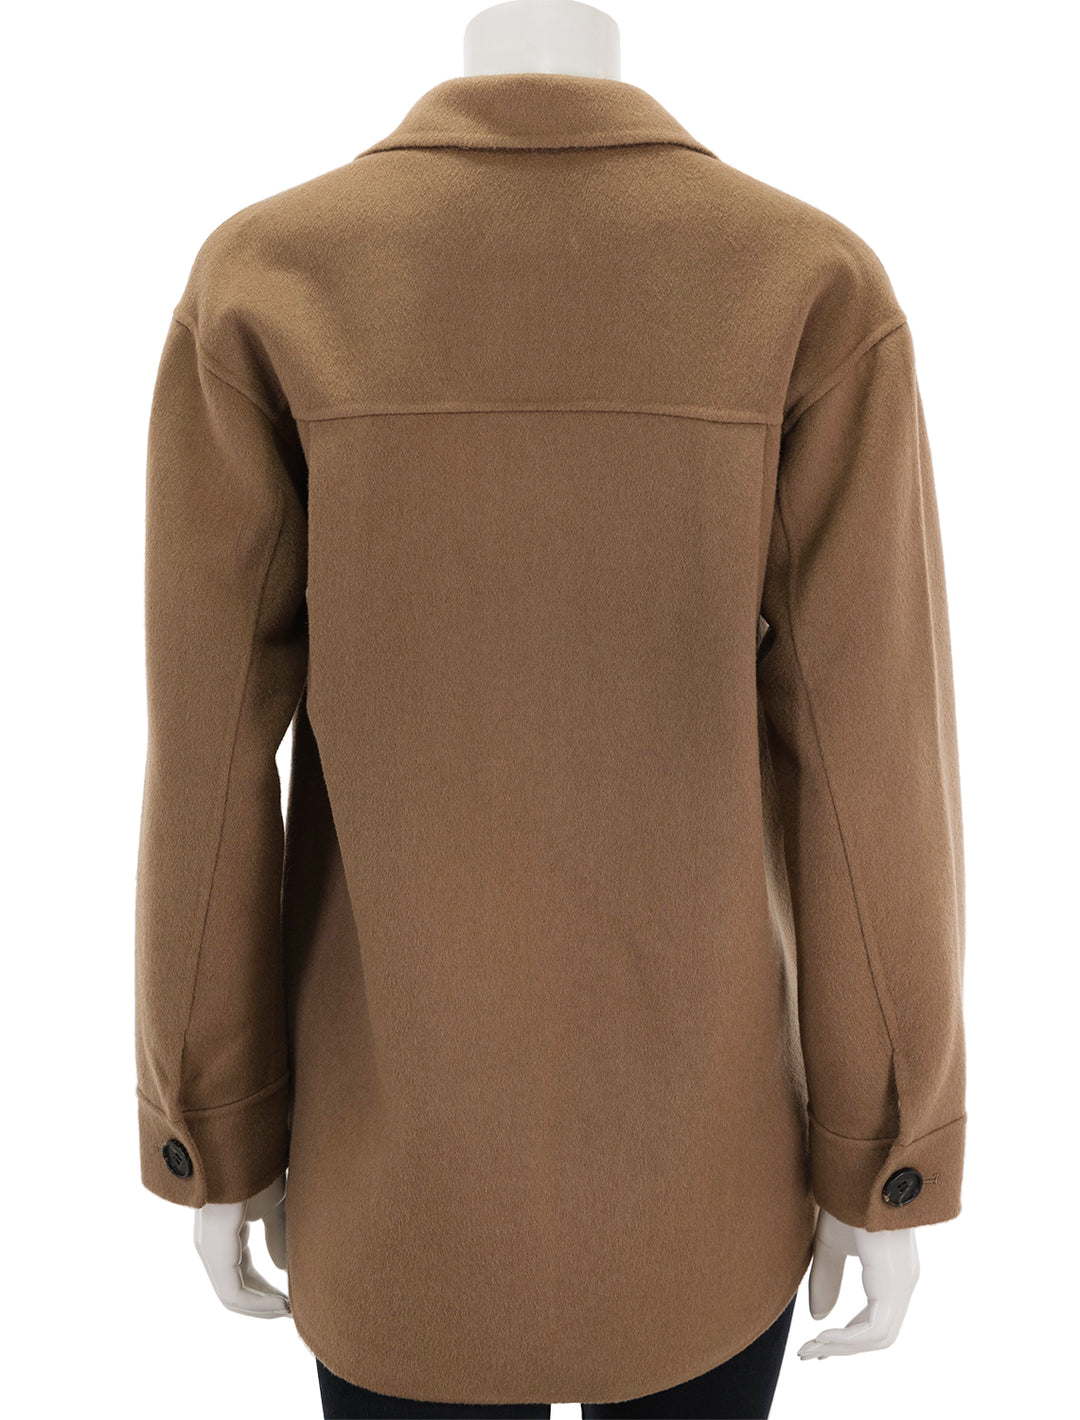 back view of connie jacket in camel